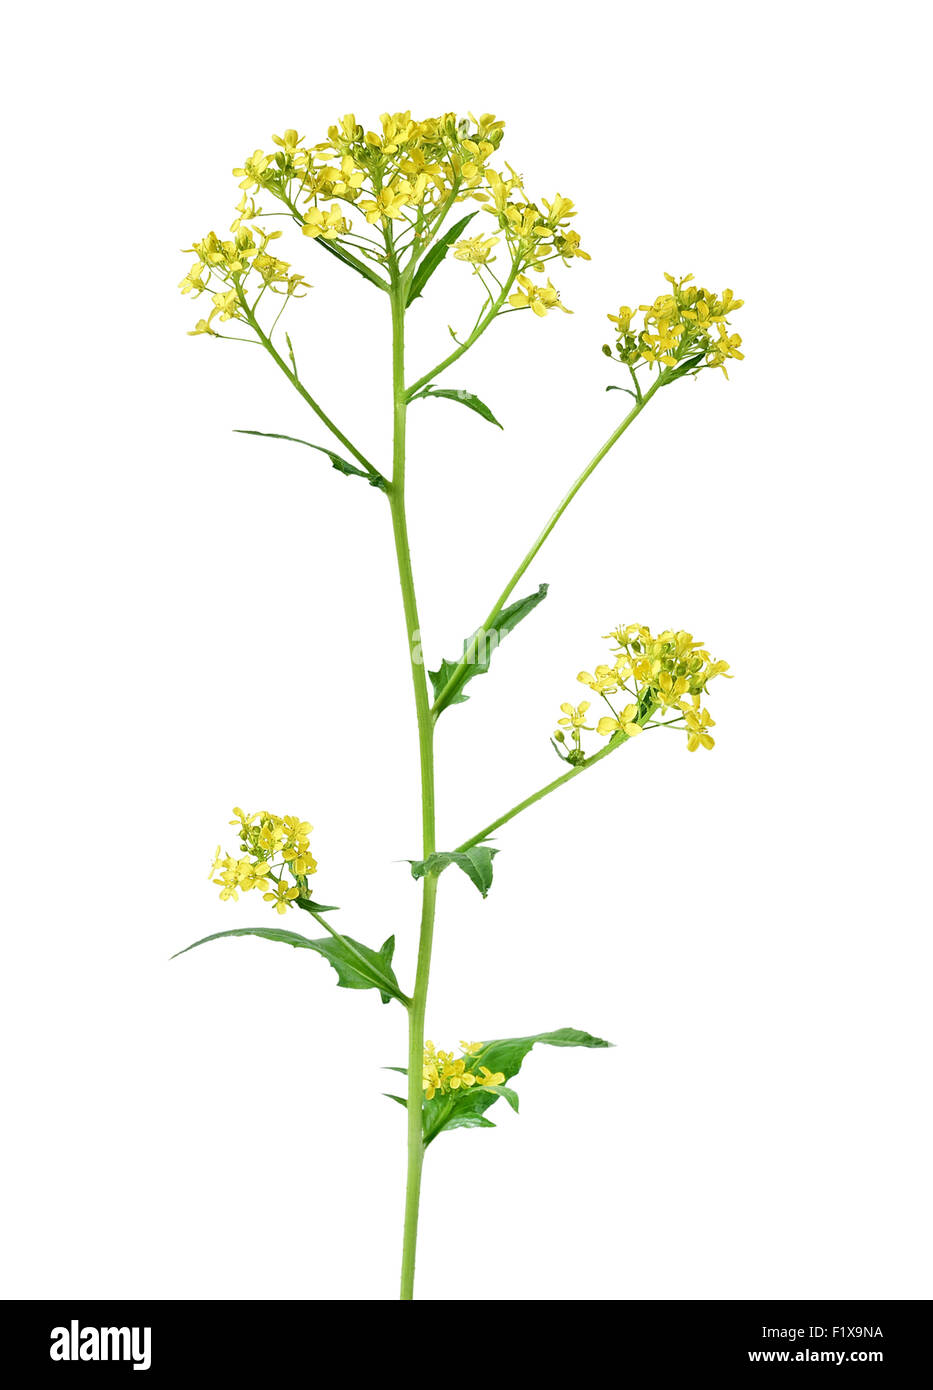 Brassica campestris flower isolated on a white background Stock Photo